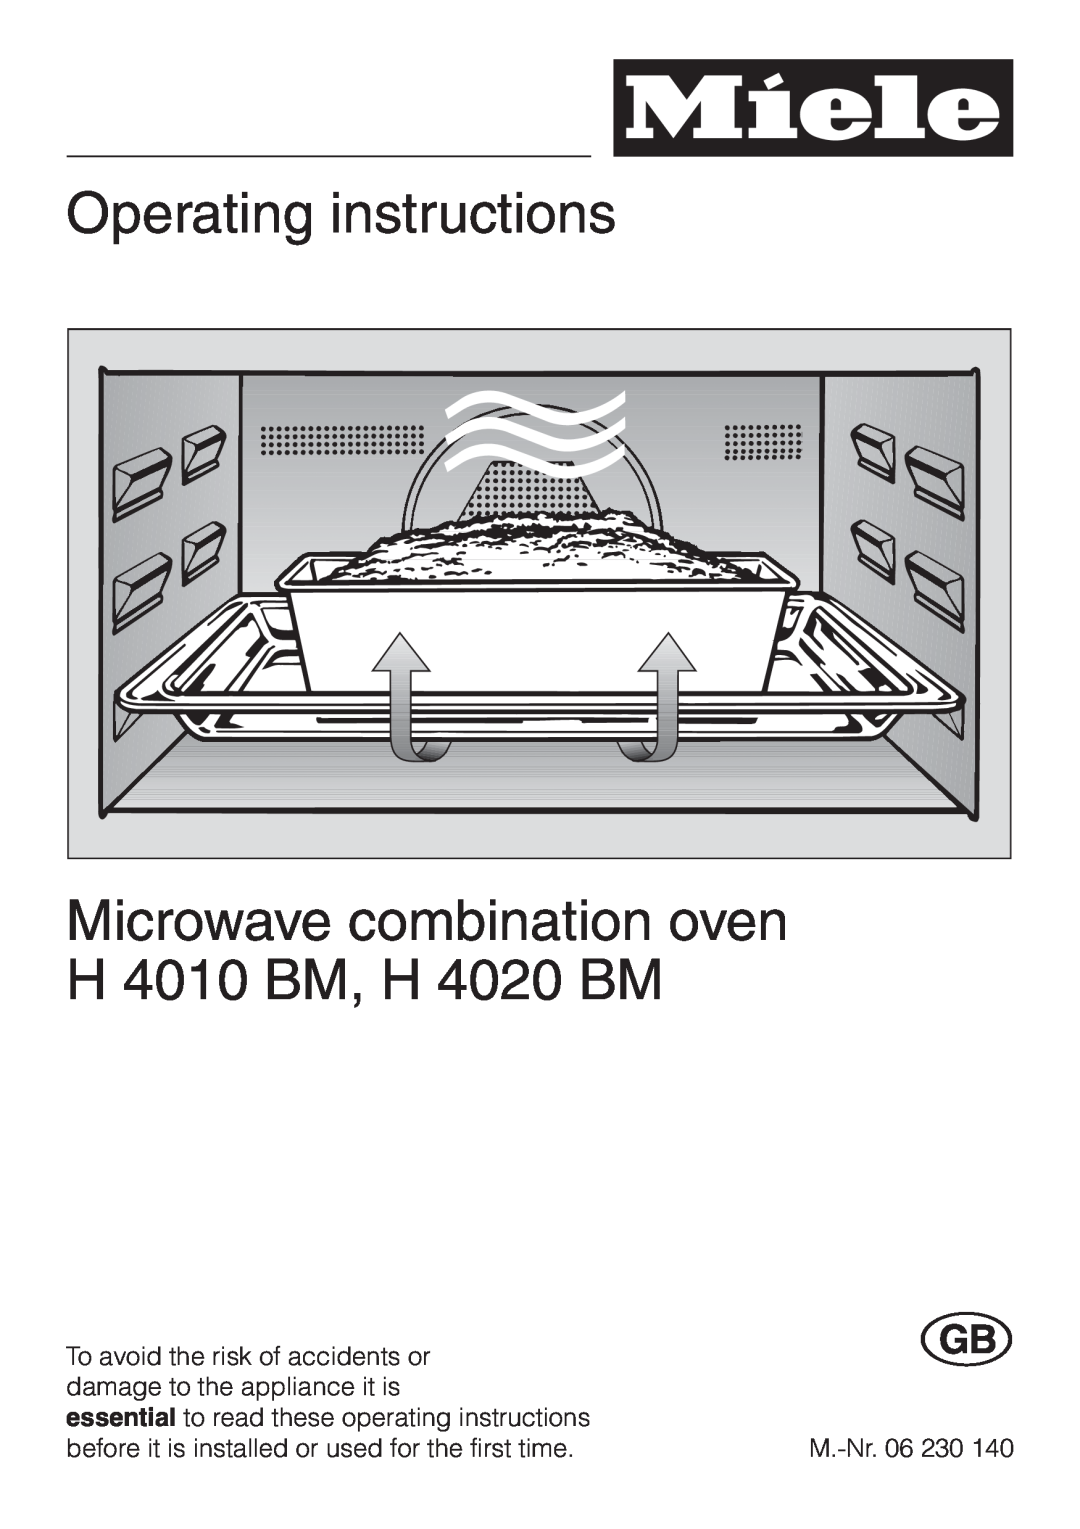 Miele manual Operating instructions, Microwave combination oven H 4010 BM, H 4020 BM 